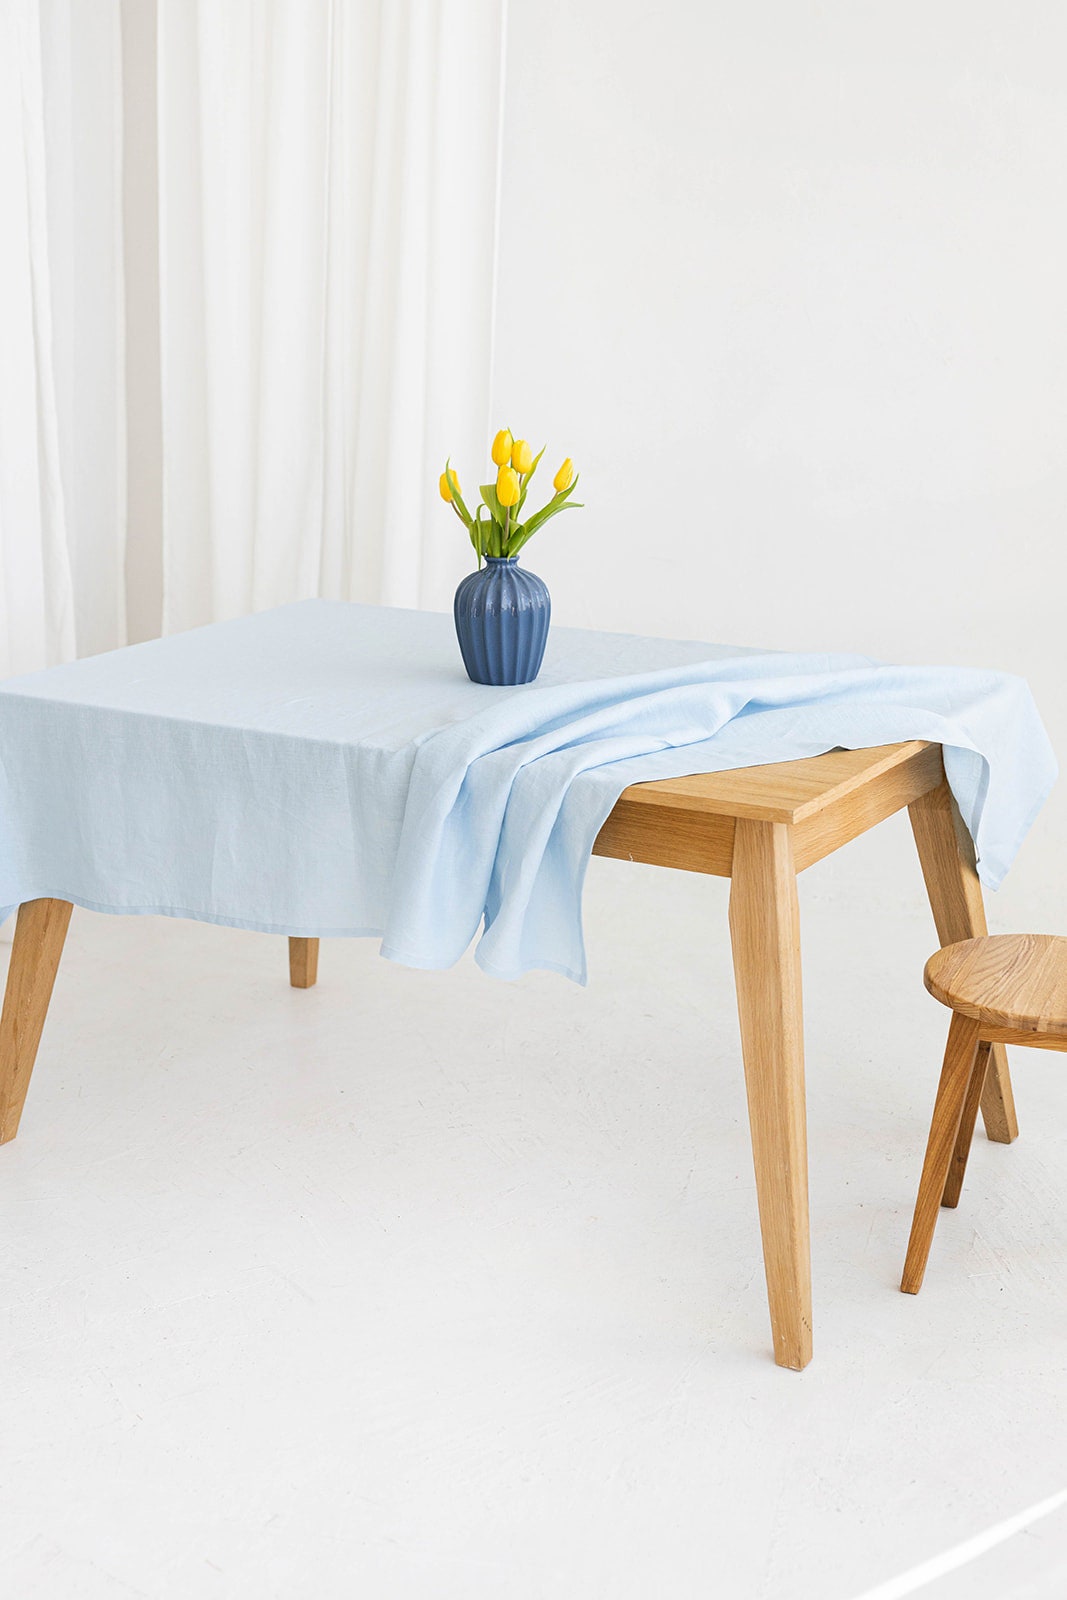 Women Serves Table With Linen Tablecloth In Sky Blue Color 4 - Daily Linen